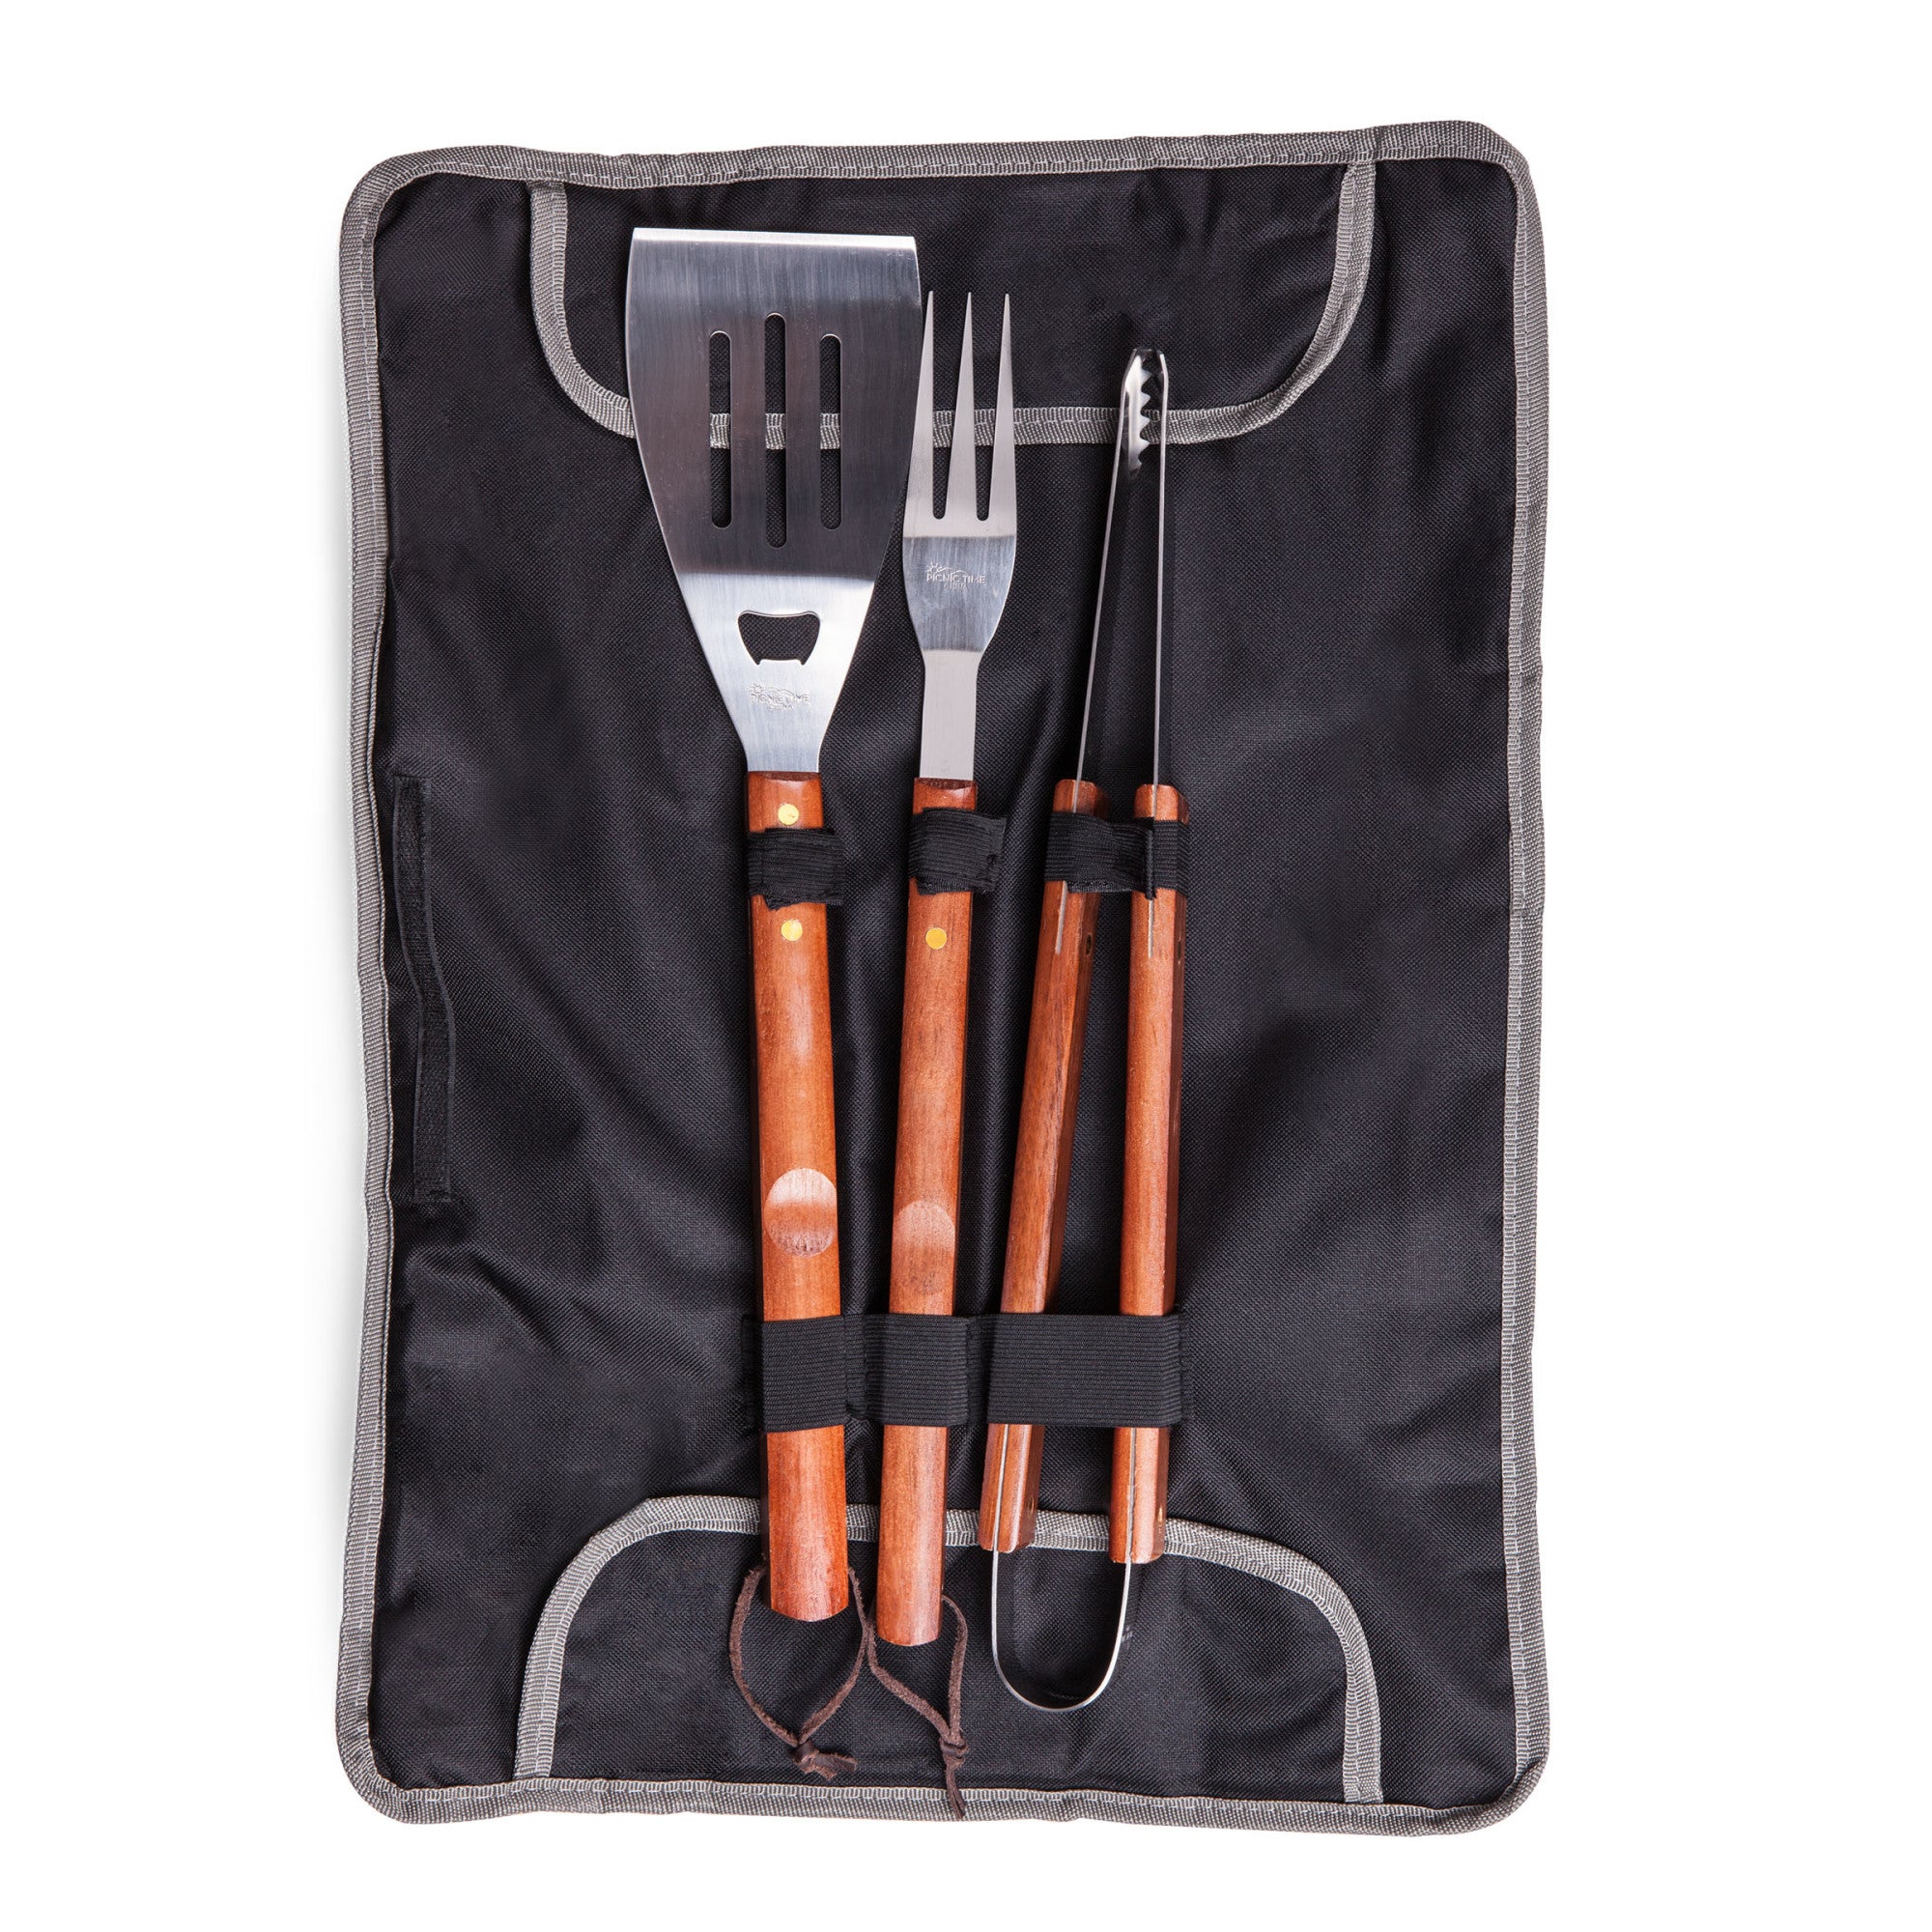 Ohio State Buckeyes - 3-Piece BBQ Tote & Grill Set